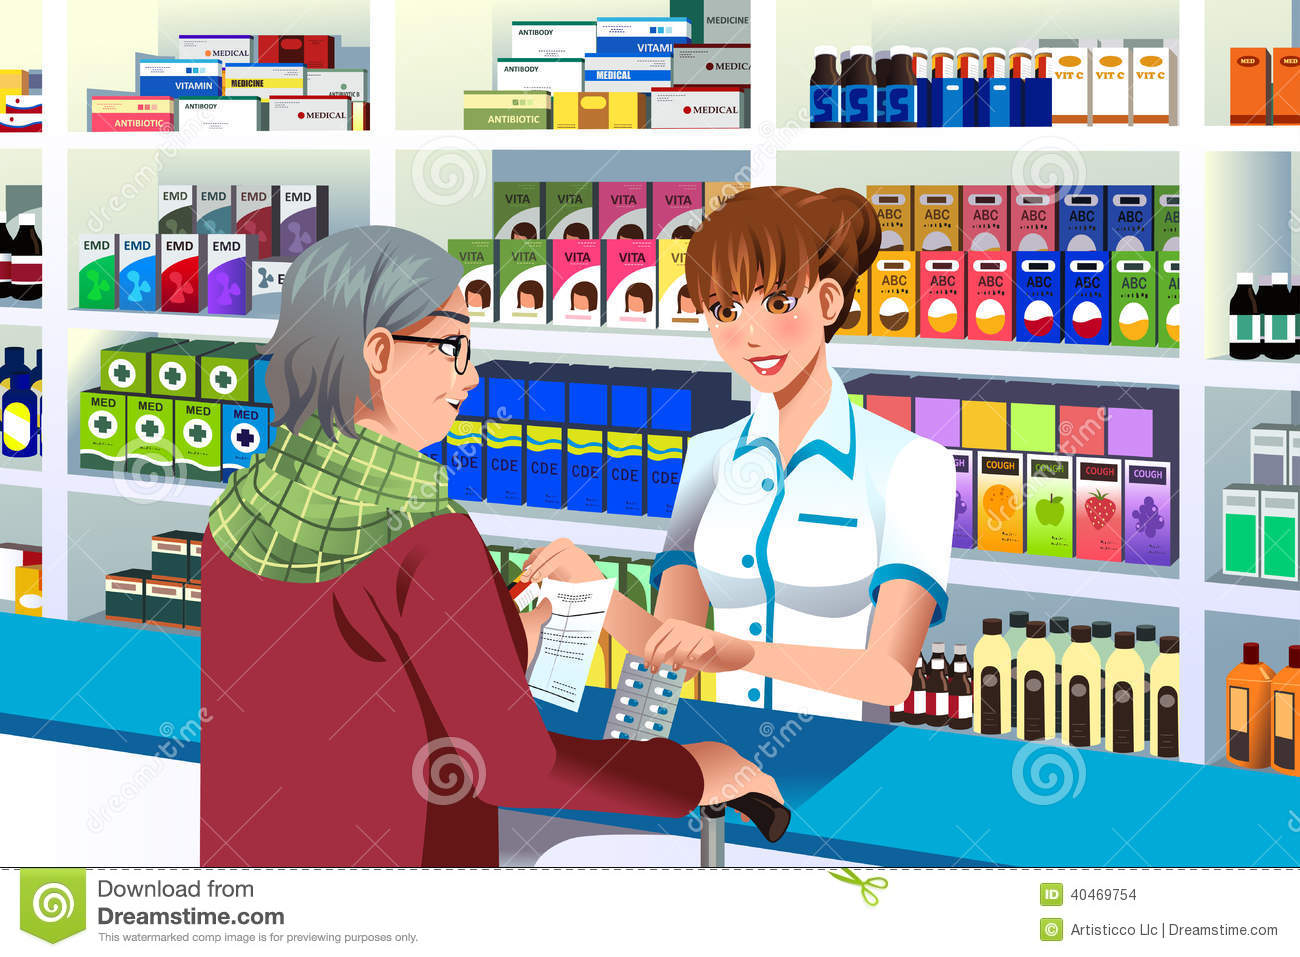 Illustration Of Pharmacist Helping An Elderly Person In The Pharmacy